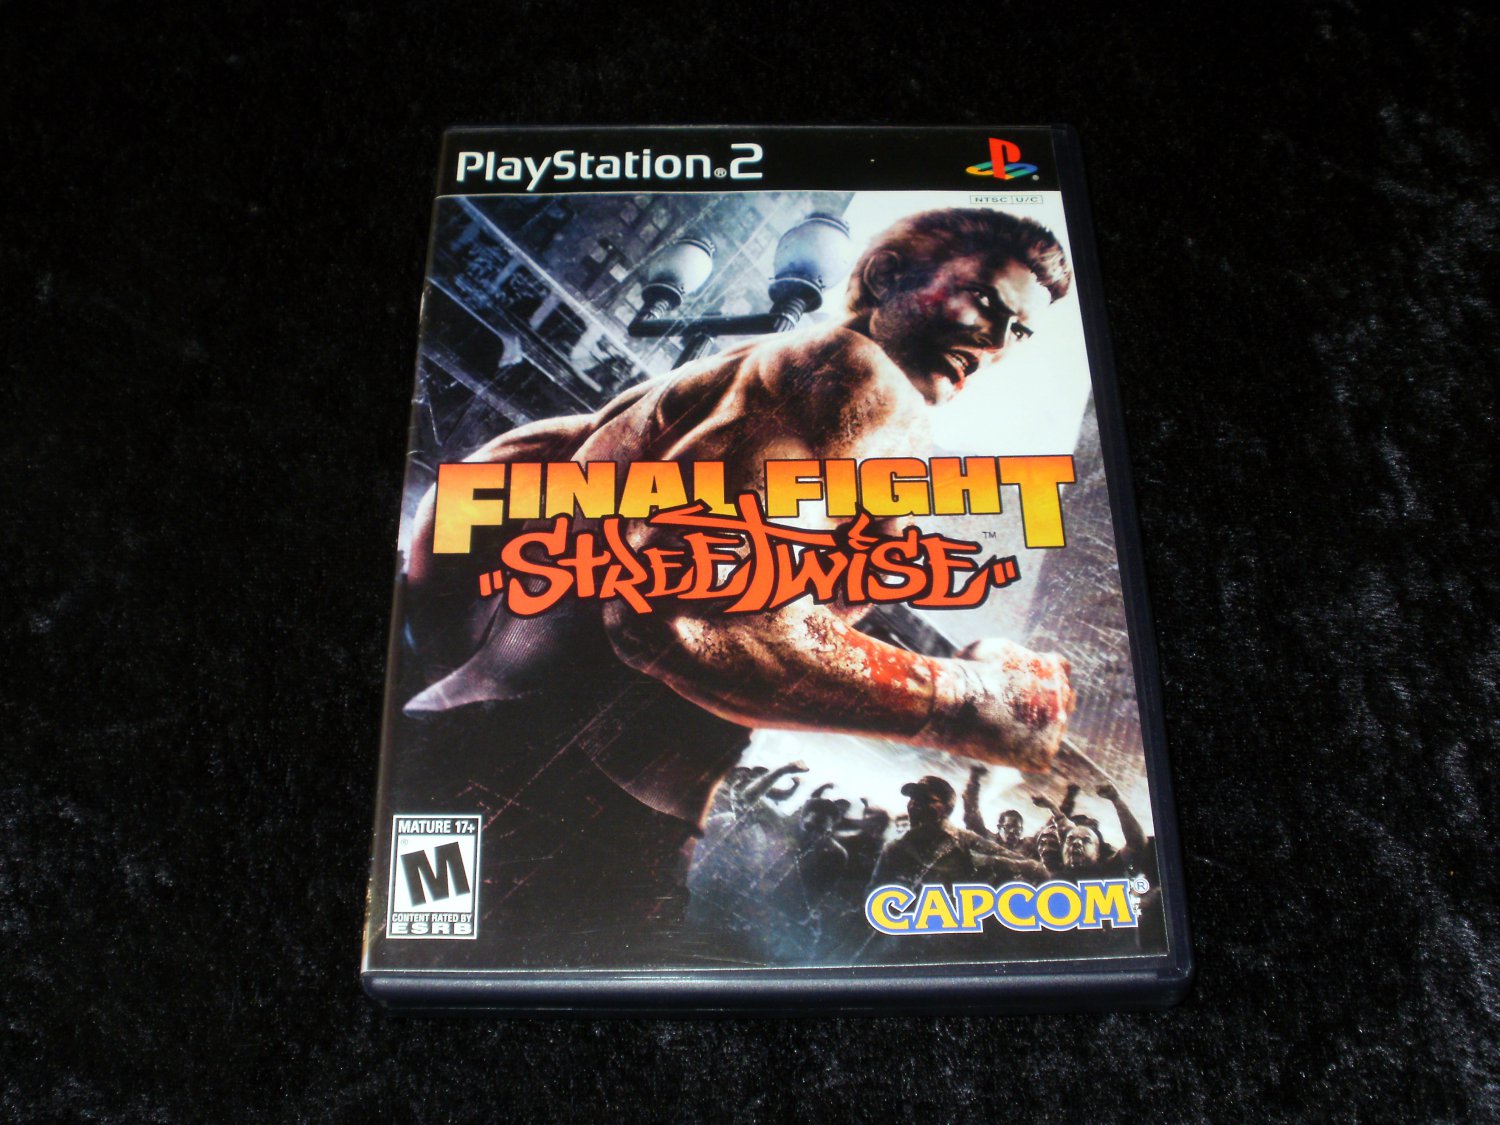 final fight streetwise ps2 gameplay